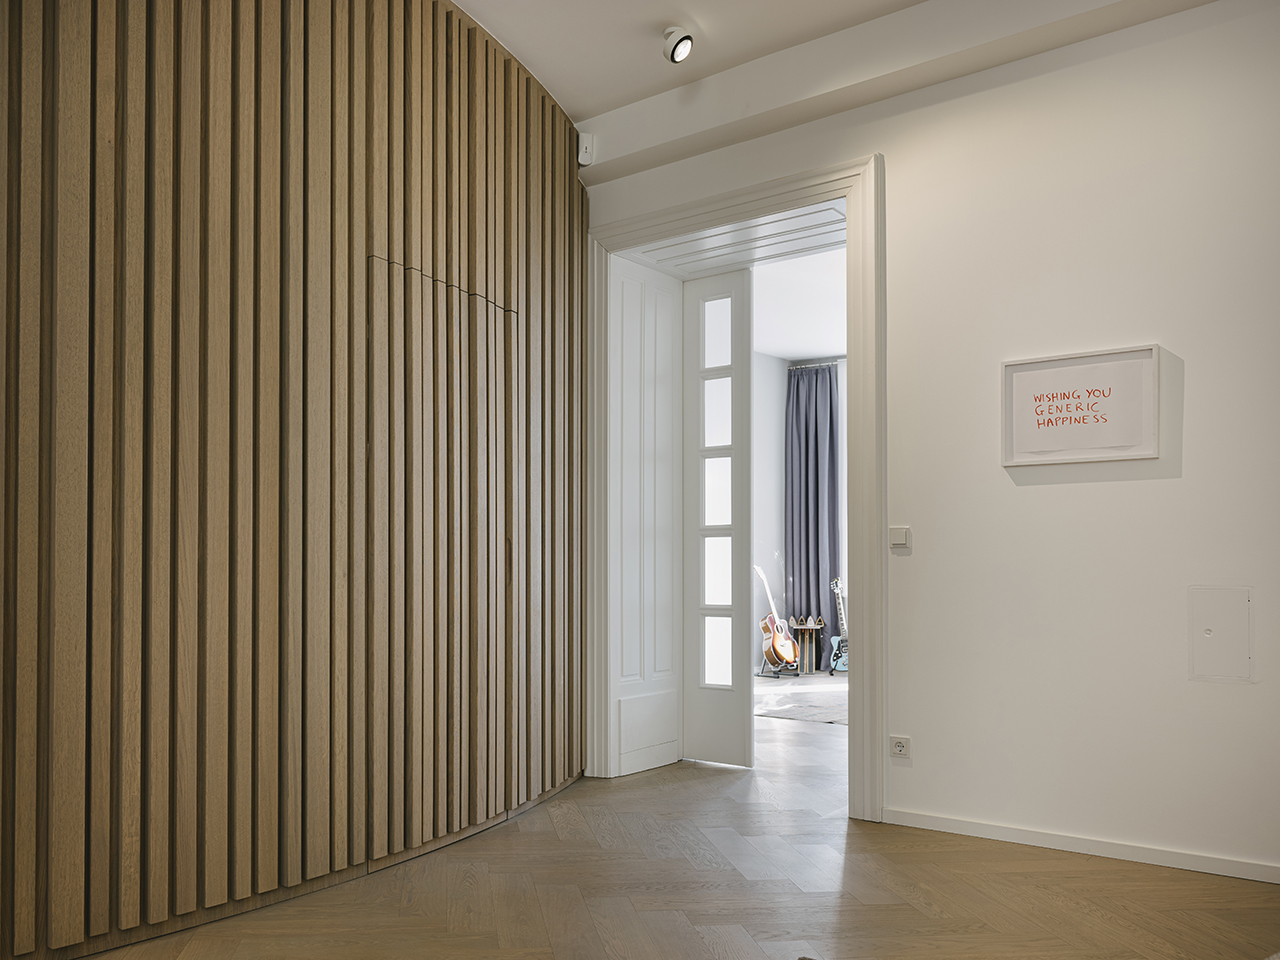 Entrance a law firm in Vienna interior design by archisphere photo copyright by Christof Wagner